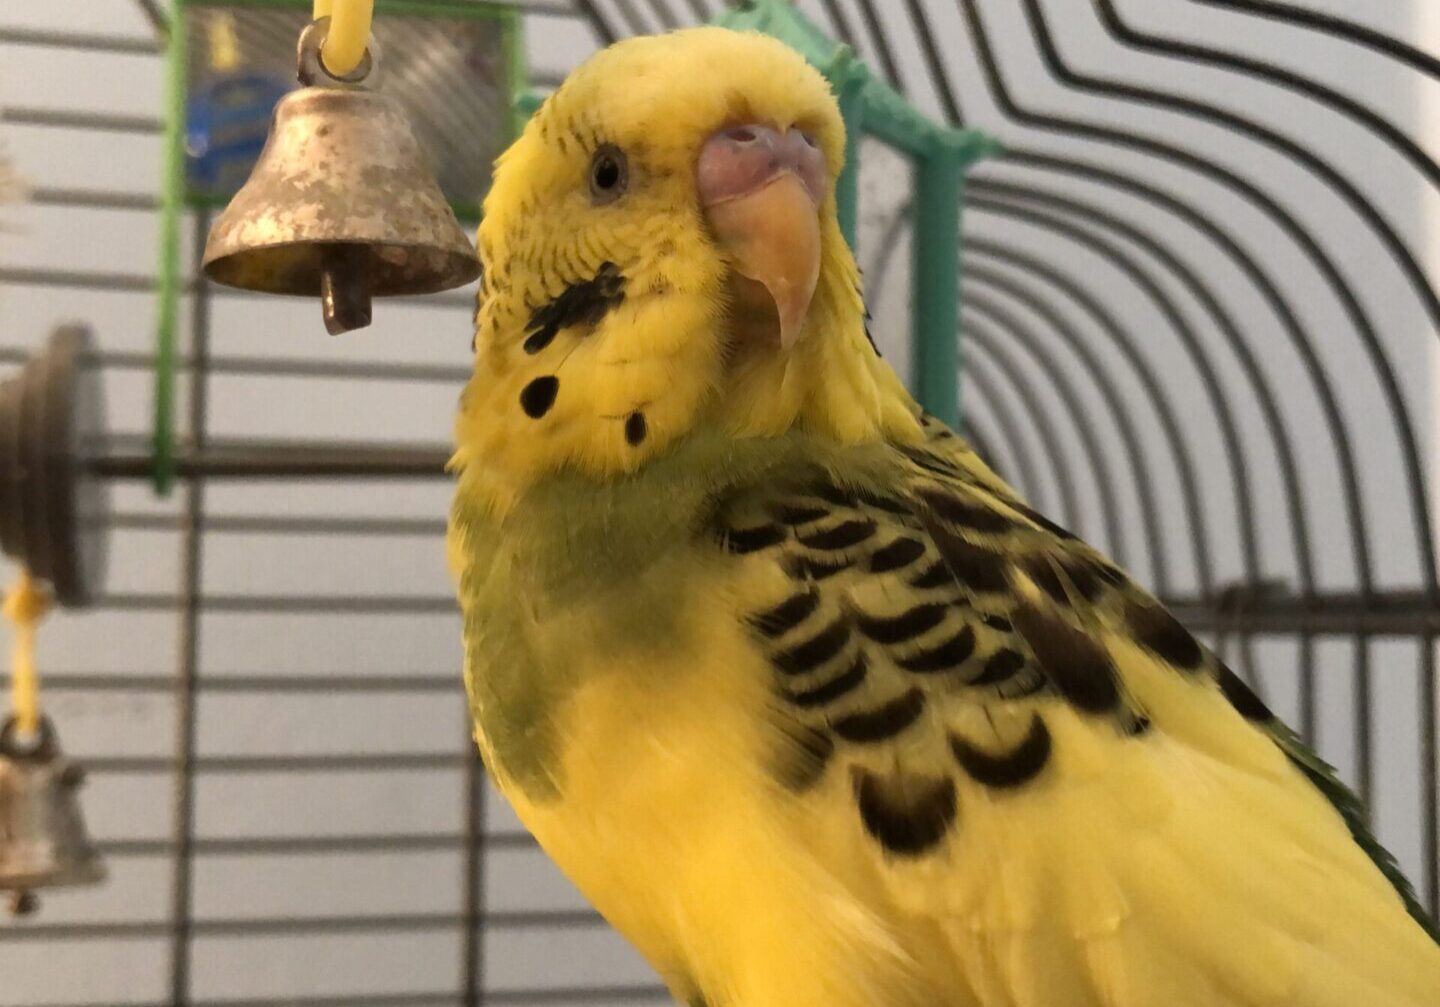 A yellow bird with black markings on its face.